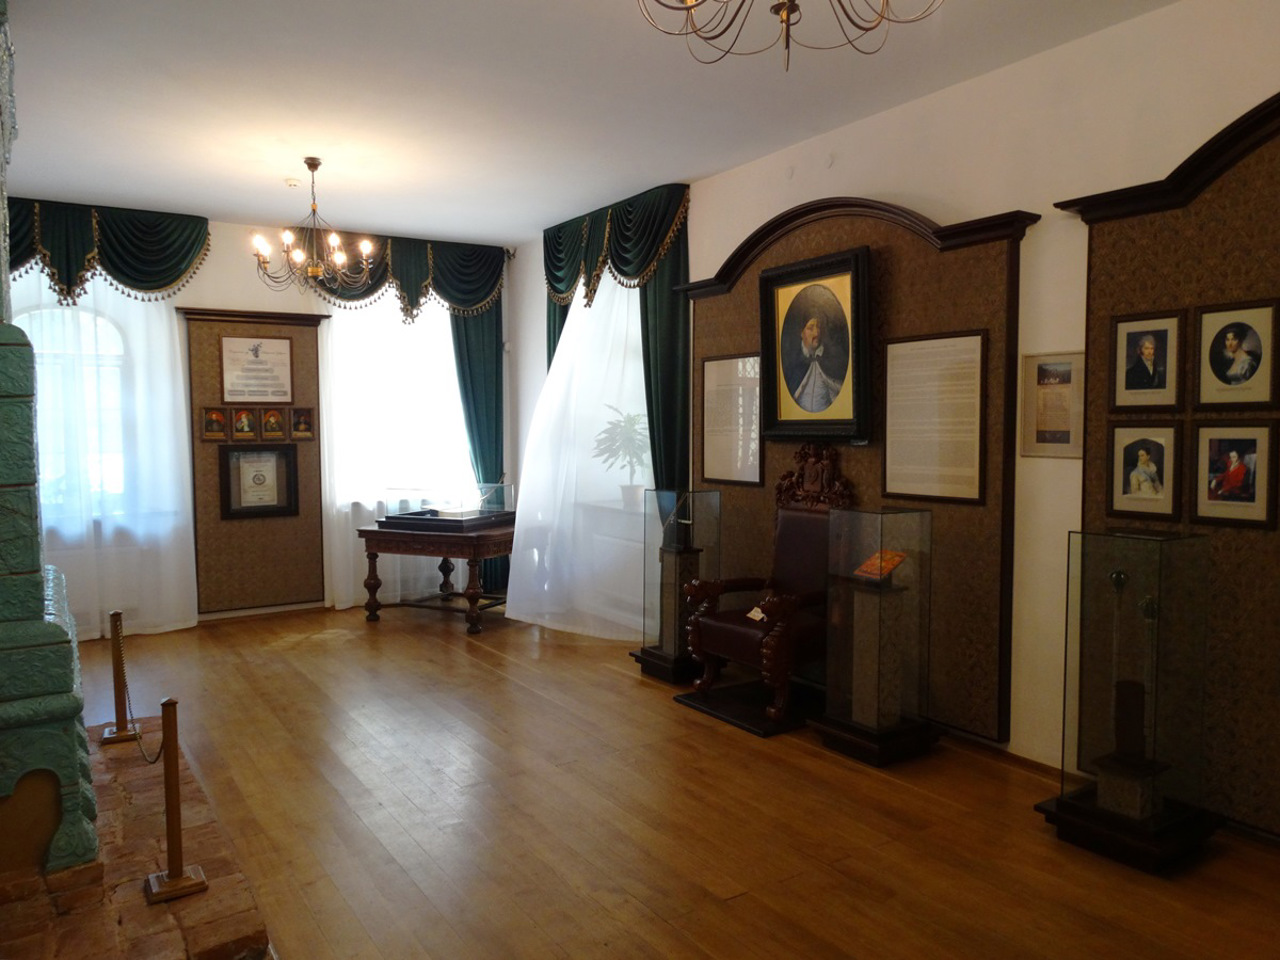 Exposition of the House of Judge General Kochubey, Baturyn